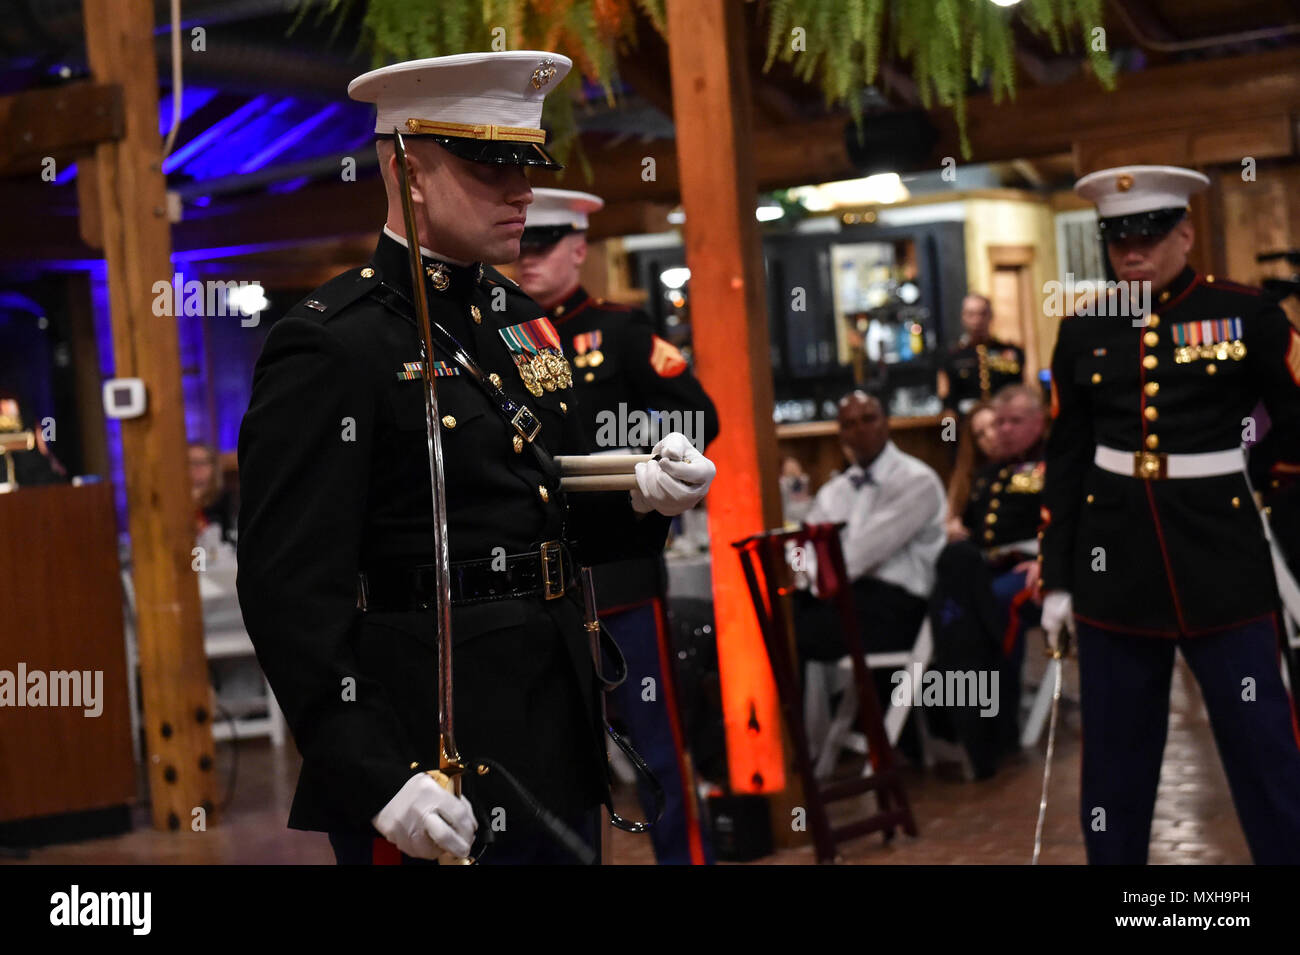 161104-N-OO032-147 POULSBO, Wash. (Nov. 4, 2016) Marine Corps 1st Lt. Derik Henderson, Marine Corps Security Force Battalion-Bangor adjutant, finishes reading Maj. Gen. John Lejeune's General Order 47 during the 241st United States Marine Corps birthday ball hosted by the battalion at the Kiana Lodge. Maj. Gen. John Lejeune issued General Order 47 on November 1, 1921, for Marines to commemorate the establishment of the Continental Marines — November 10, 1775. (U.S. Navy photo by Petty Officer 1st Class Cory Asato/Released) Stock Photo